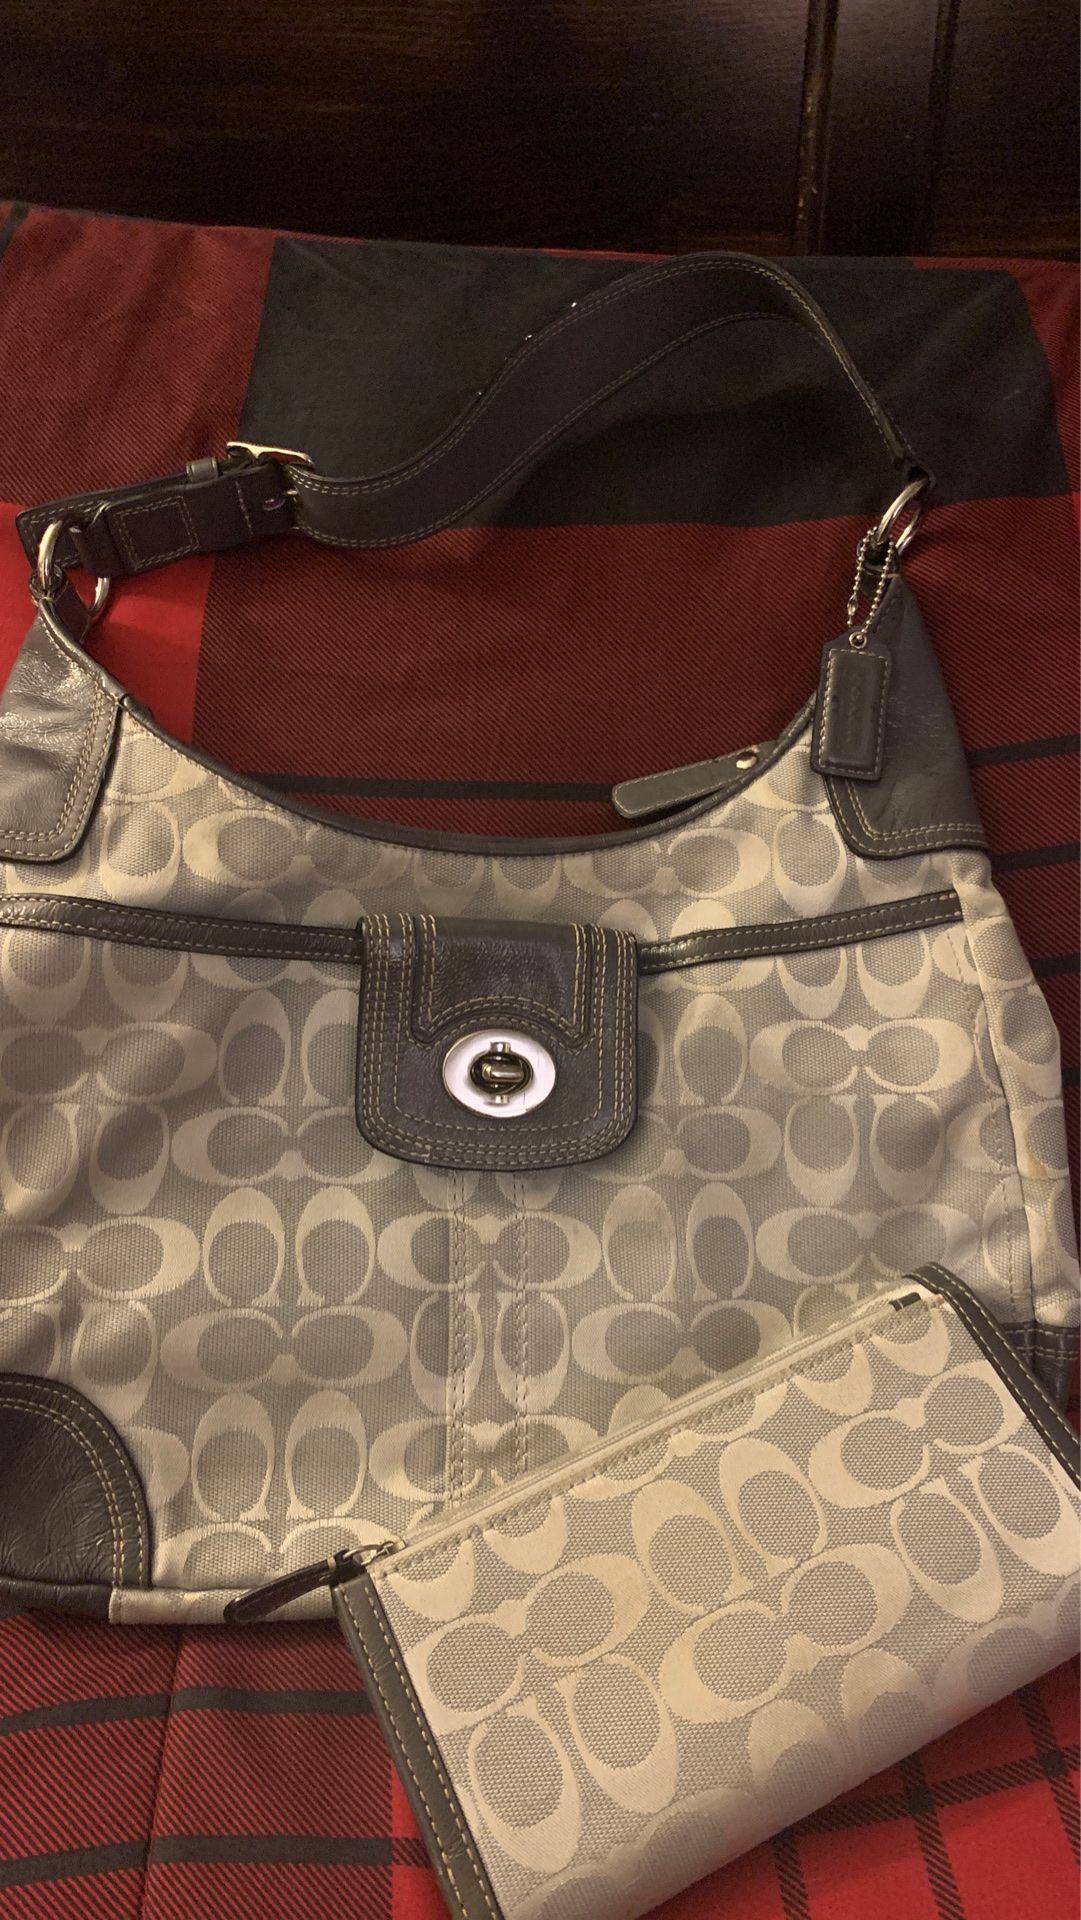 Coach purse with matching wallet